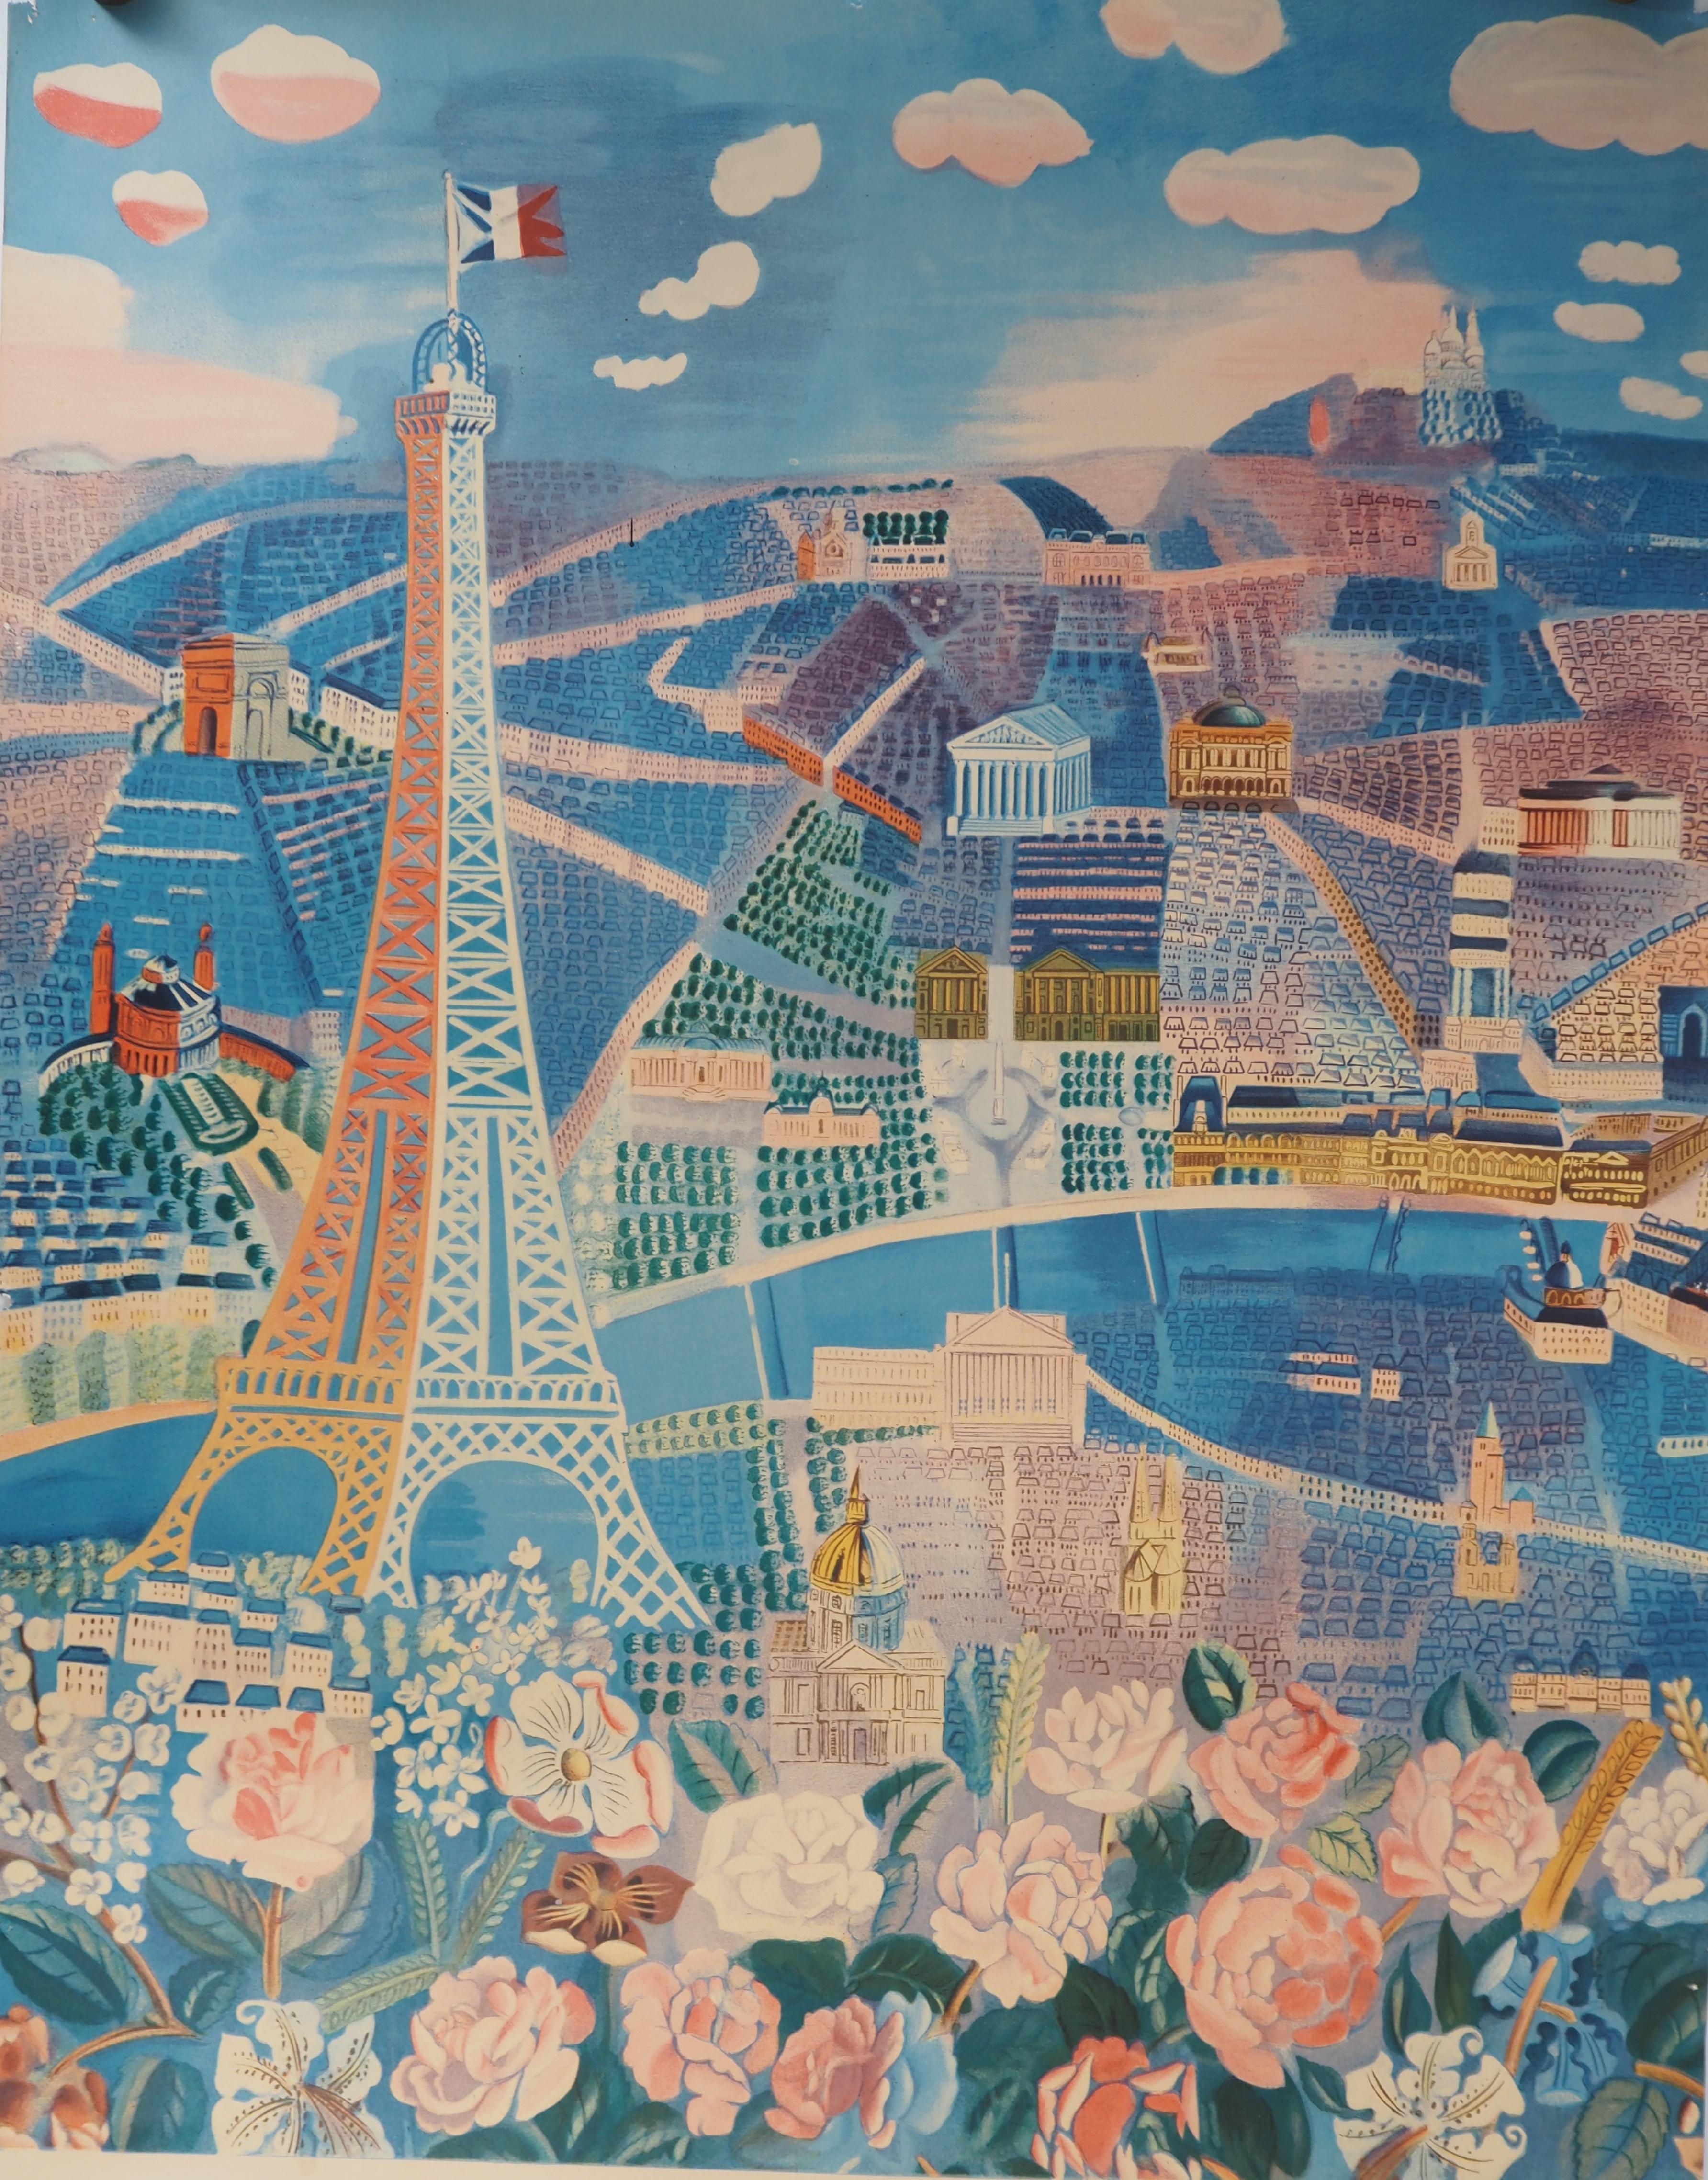 Spring in France : Paris, Rose and Eiffel Tower - Photolithograph Poster - Print by Raoul Dufy